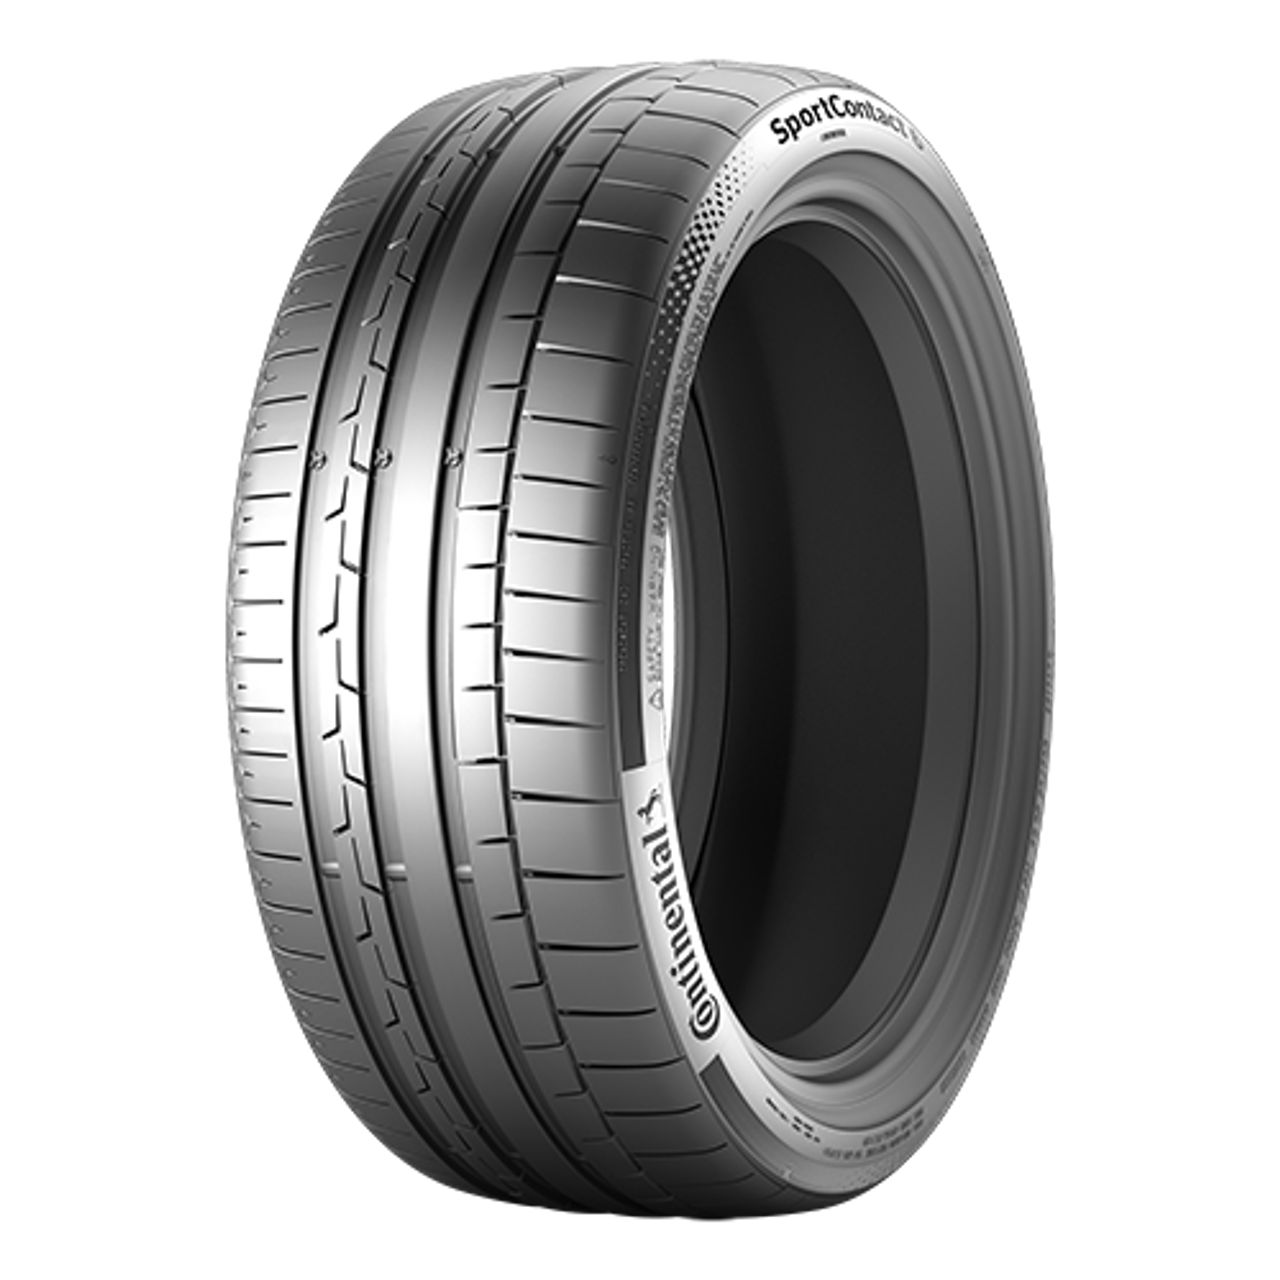 CONTINENTAL SPORTCONTACT 6 (AO) (EVc) 285/40R22 110Y FR